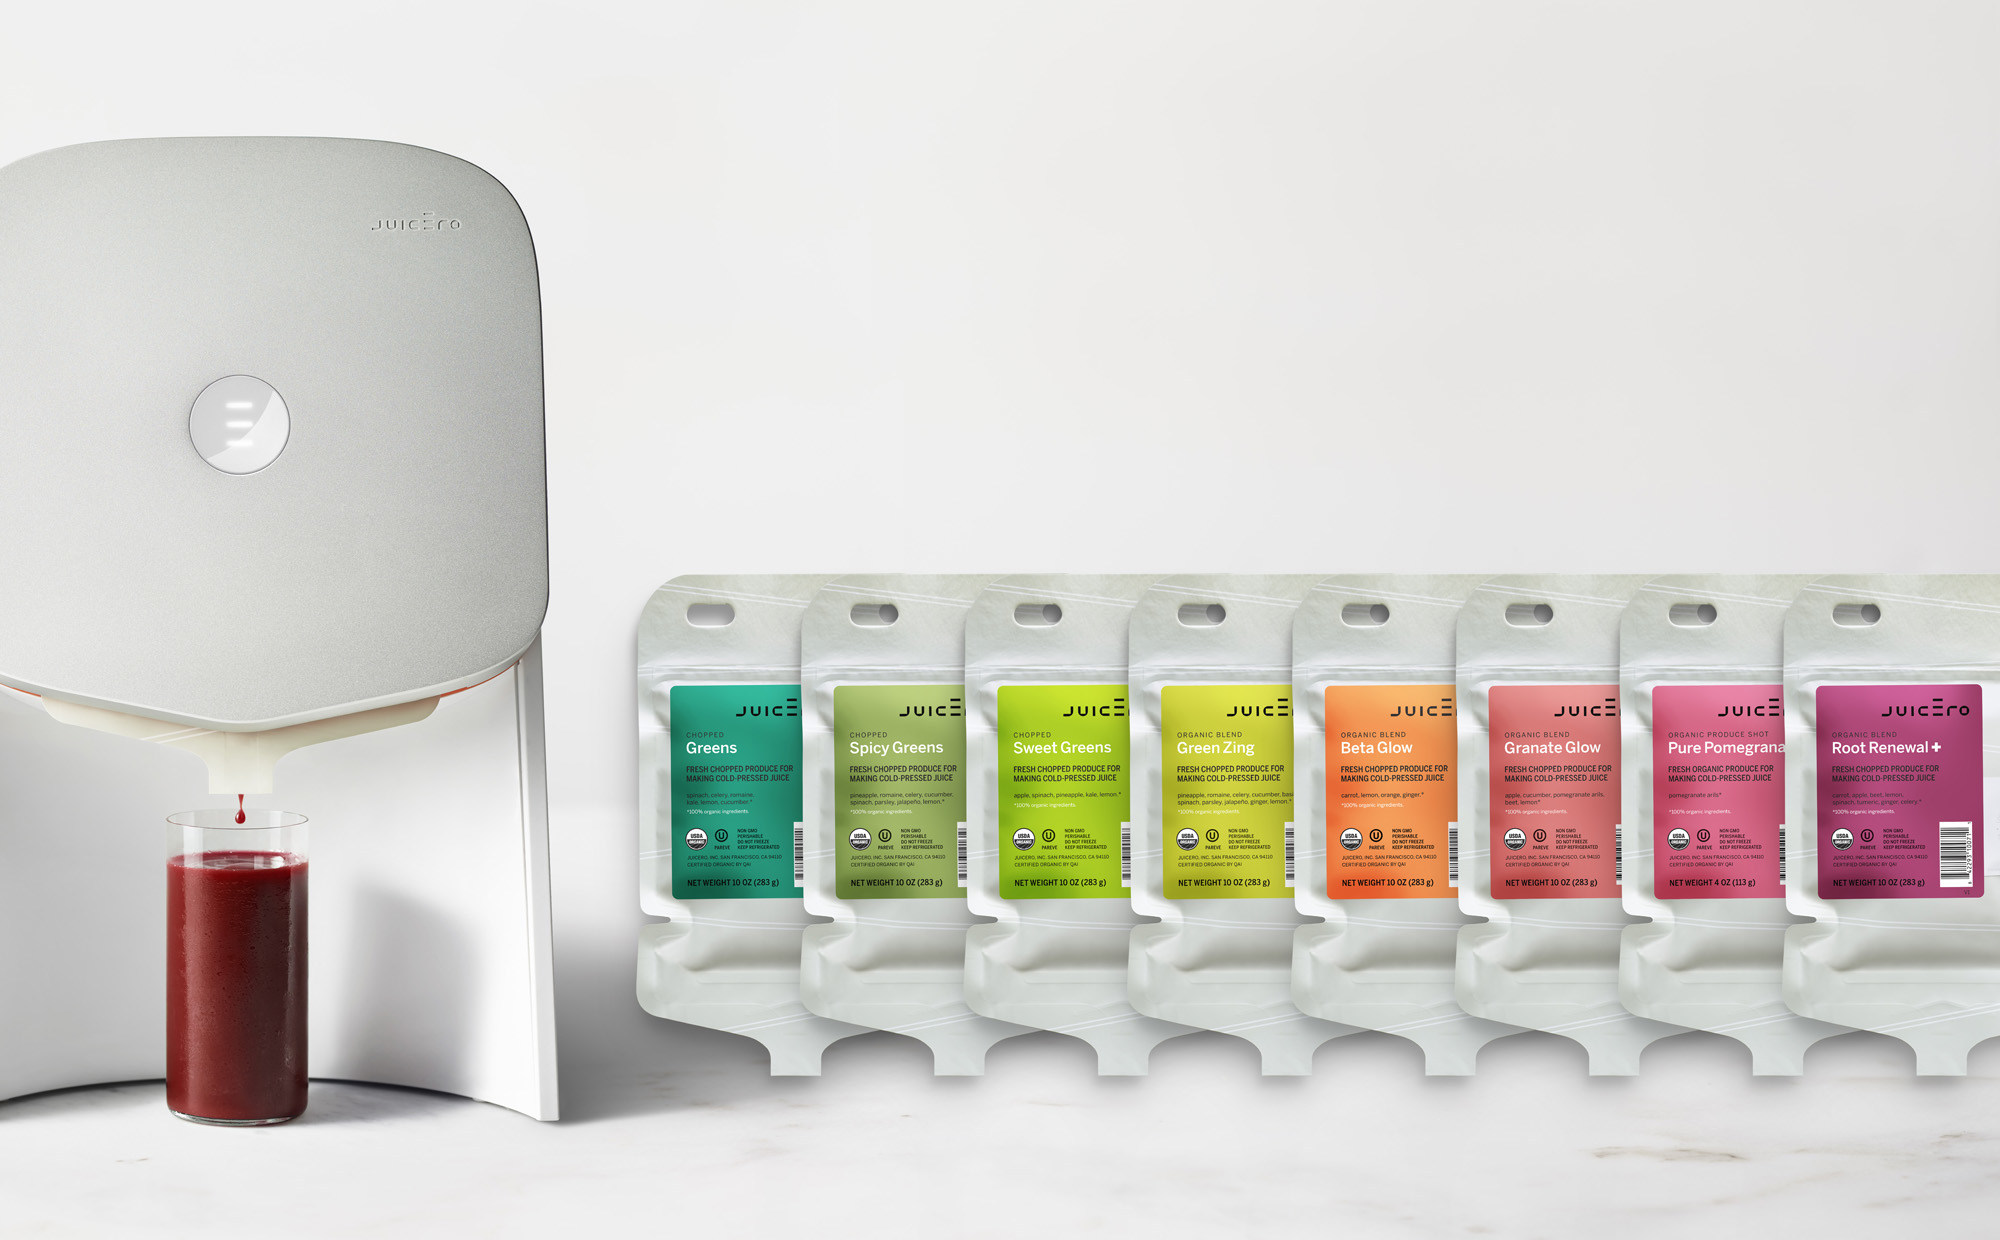 The Juicero Was A Terrible Idea That Became A Money-Losing Business